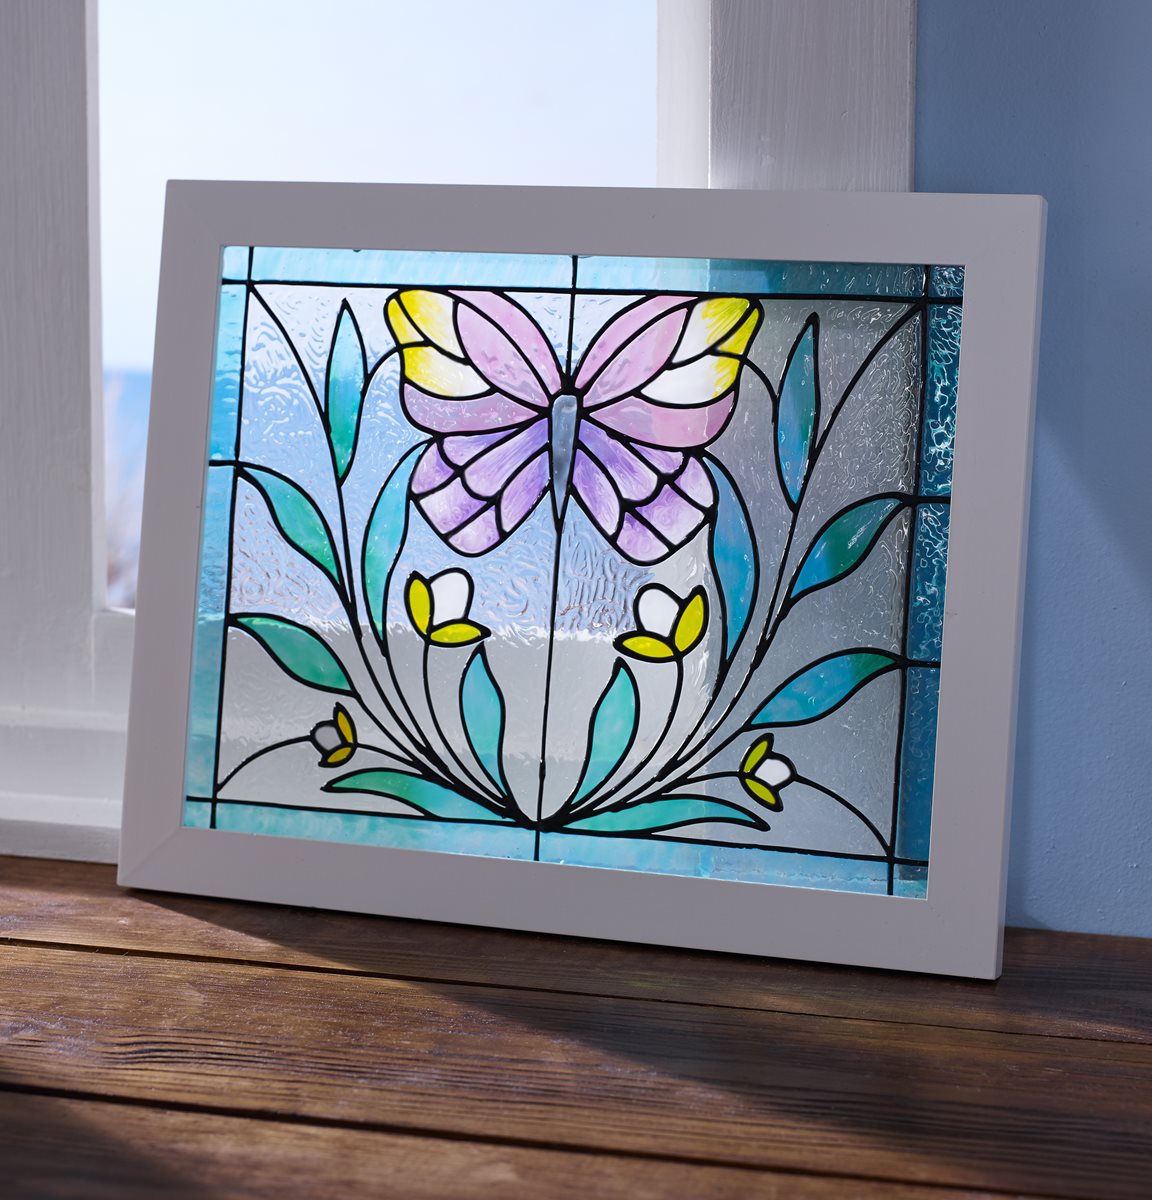 https://plaidonline.com/getattachment/Projects/Gallery-Glass-Pastel-Butterfly-with-Floral-Design/GG-Instructions-11x14-White-frame-with-pastel-butterfly-and-aqua-border-yellow-flowers-split-in-middle.jpg;